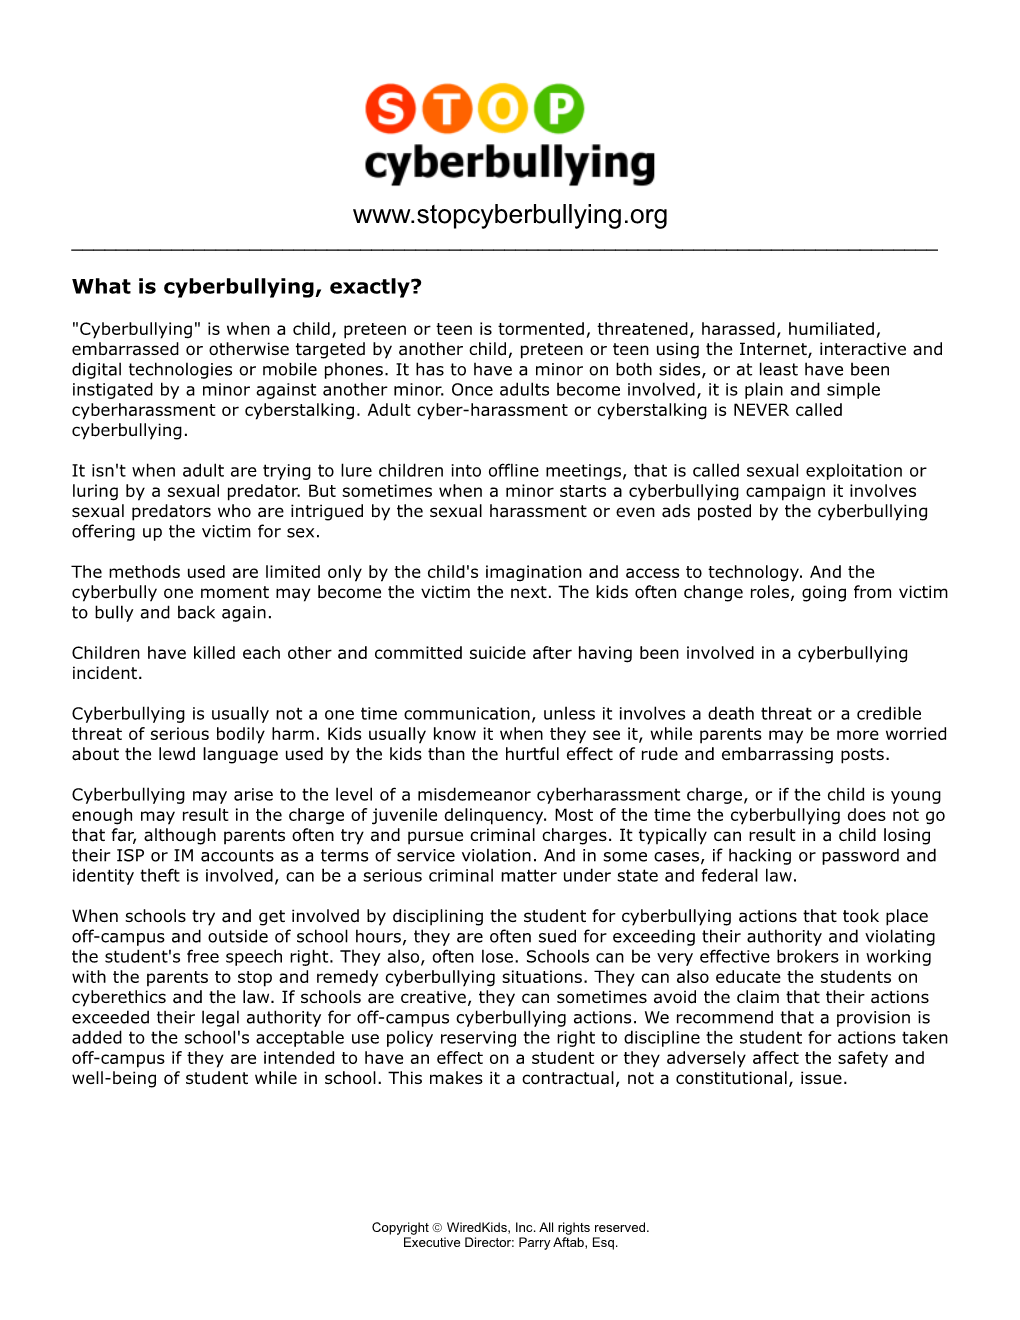 What Is Cyberbullying, Exactly?